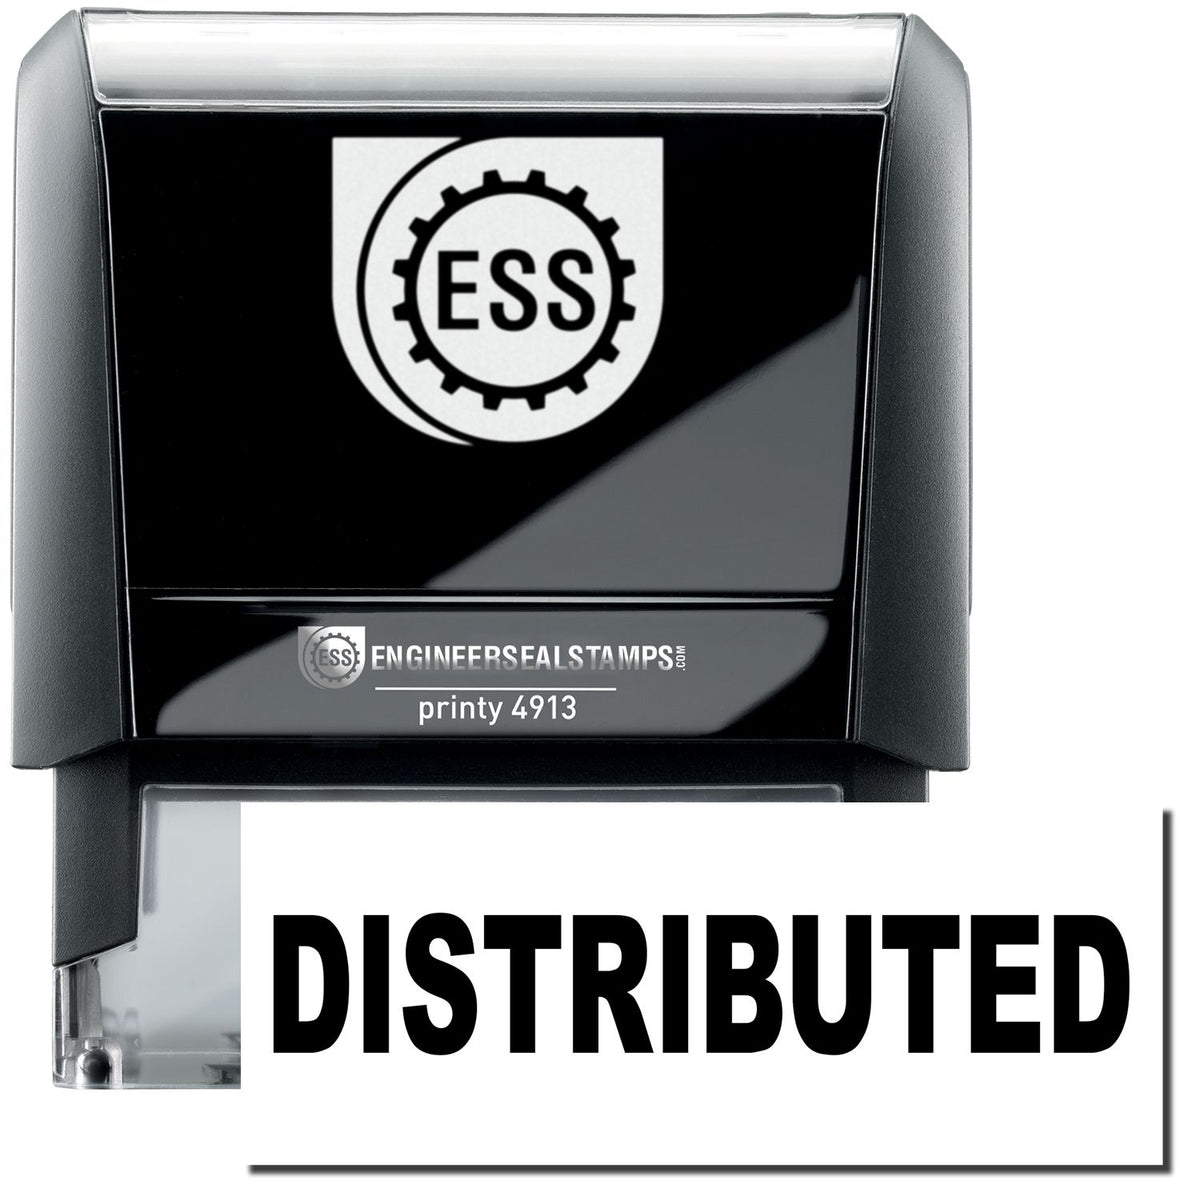 A self-inking stamp with a stamped image showing how the text &quot;DISTRIBUTED&quot; in a large bold font is displayed by it.